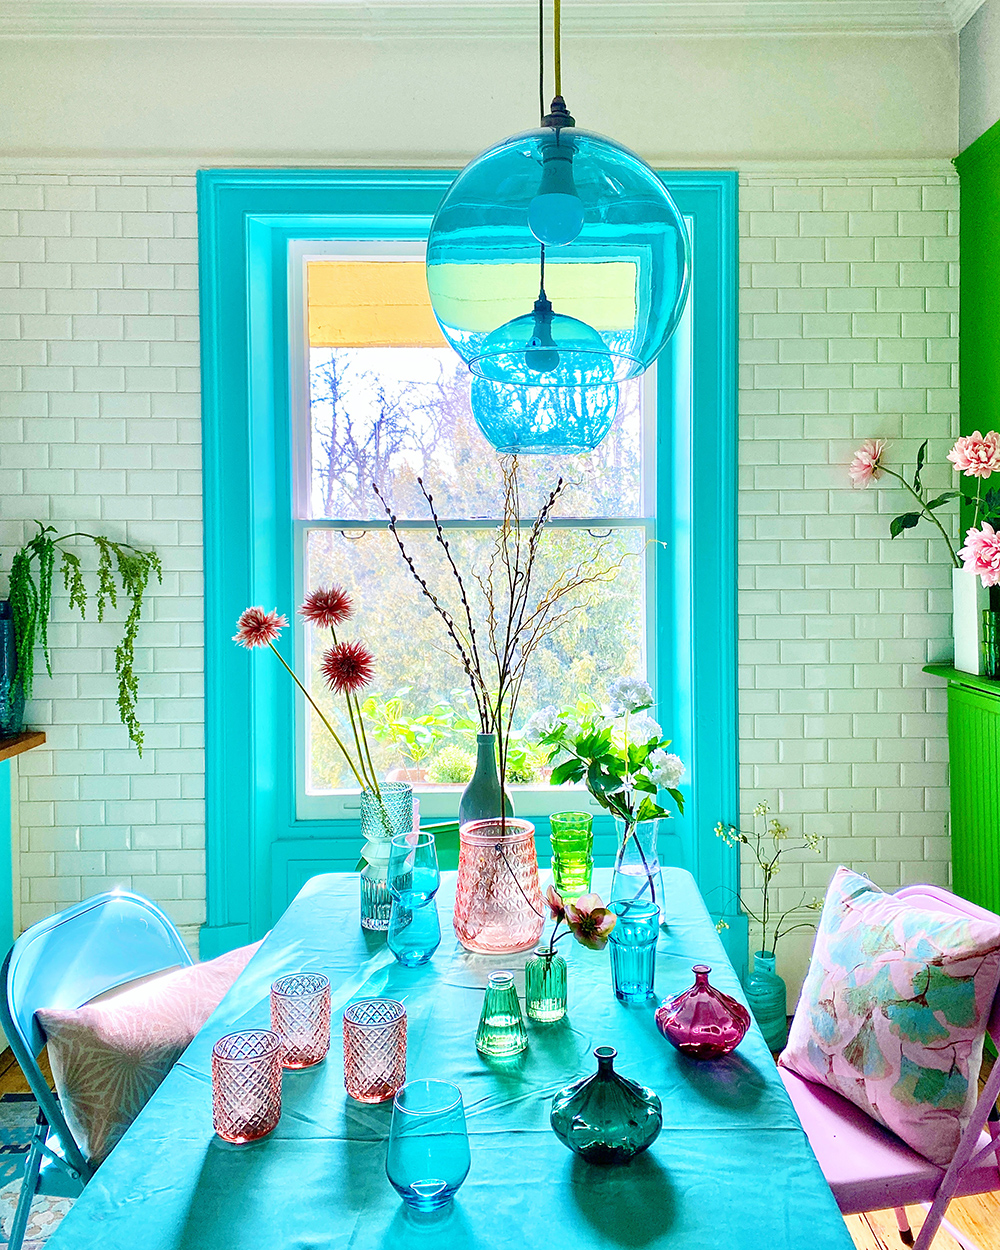 House tour of stunning London home with pastel hues and colourful wall murals - green and blue kitchen